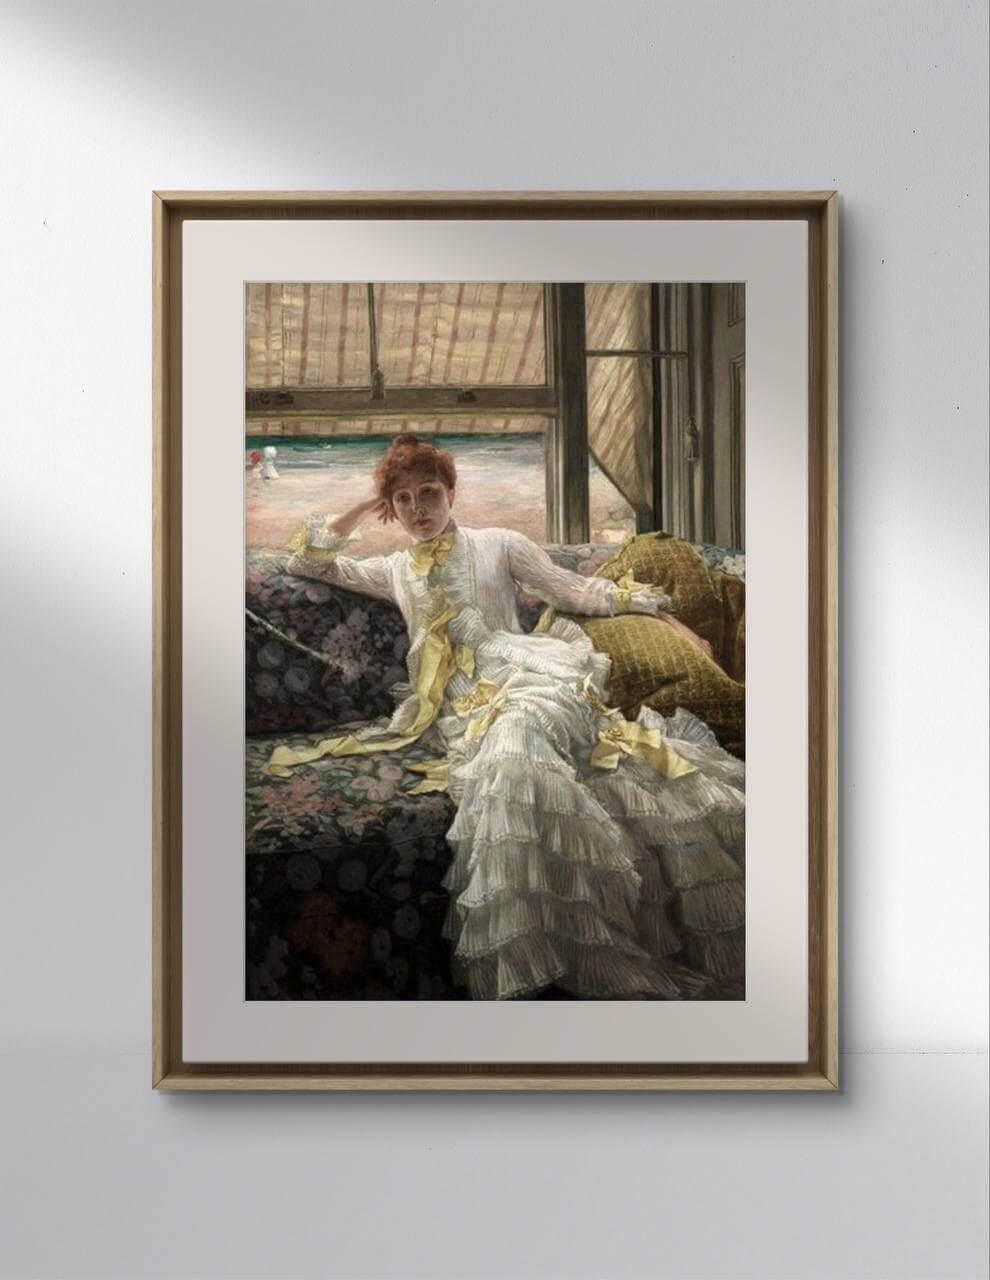 A minimalist interior setting with a white wall and wooden flooring. The framed poster of "Seaside, July" by James Tissot is hung on the wall, illuminated by natural light. The painting reproduction serves as excellent wall art for a home gallery wall or a serene reading nook, bringing a touch of Victorian elegance to the decor.